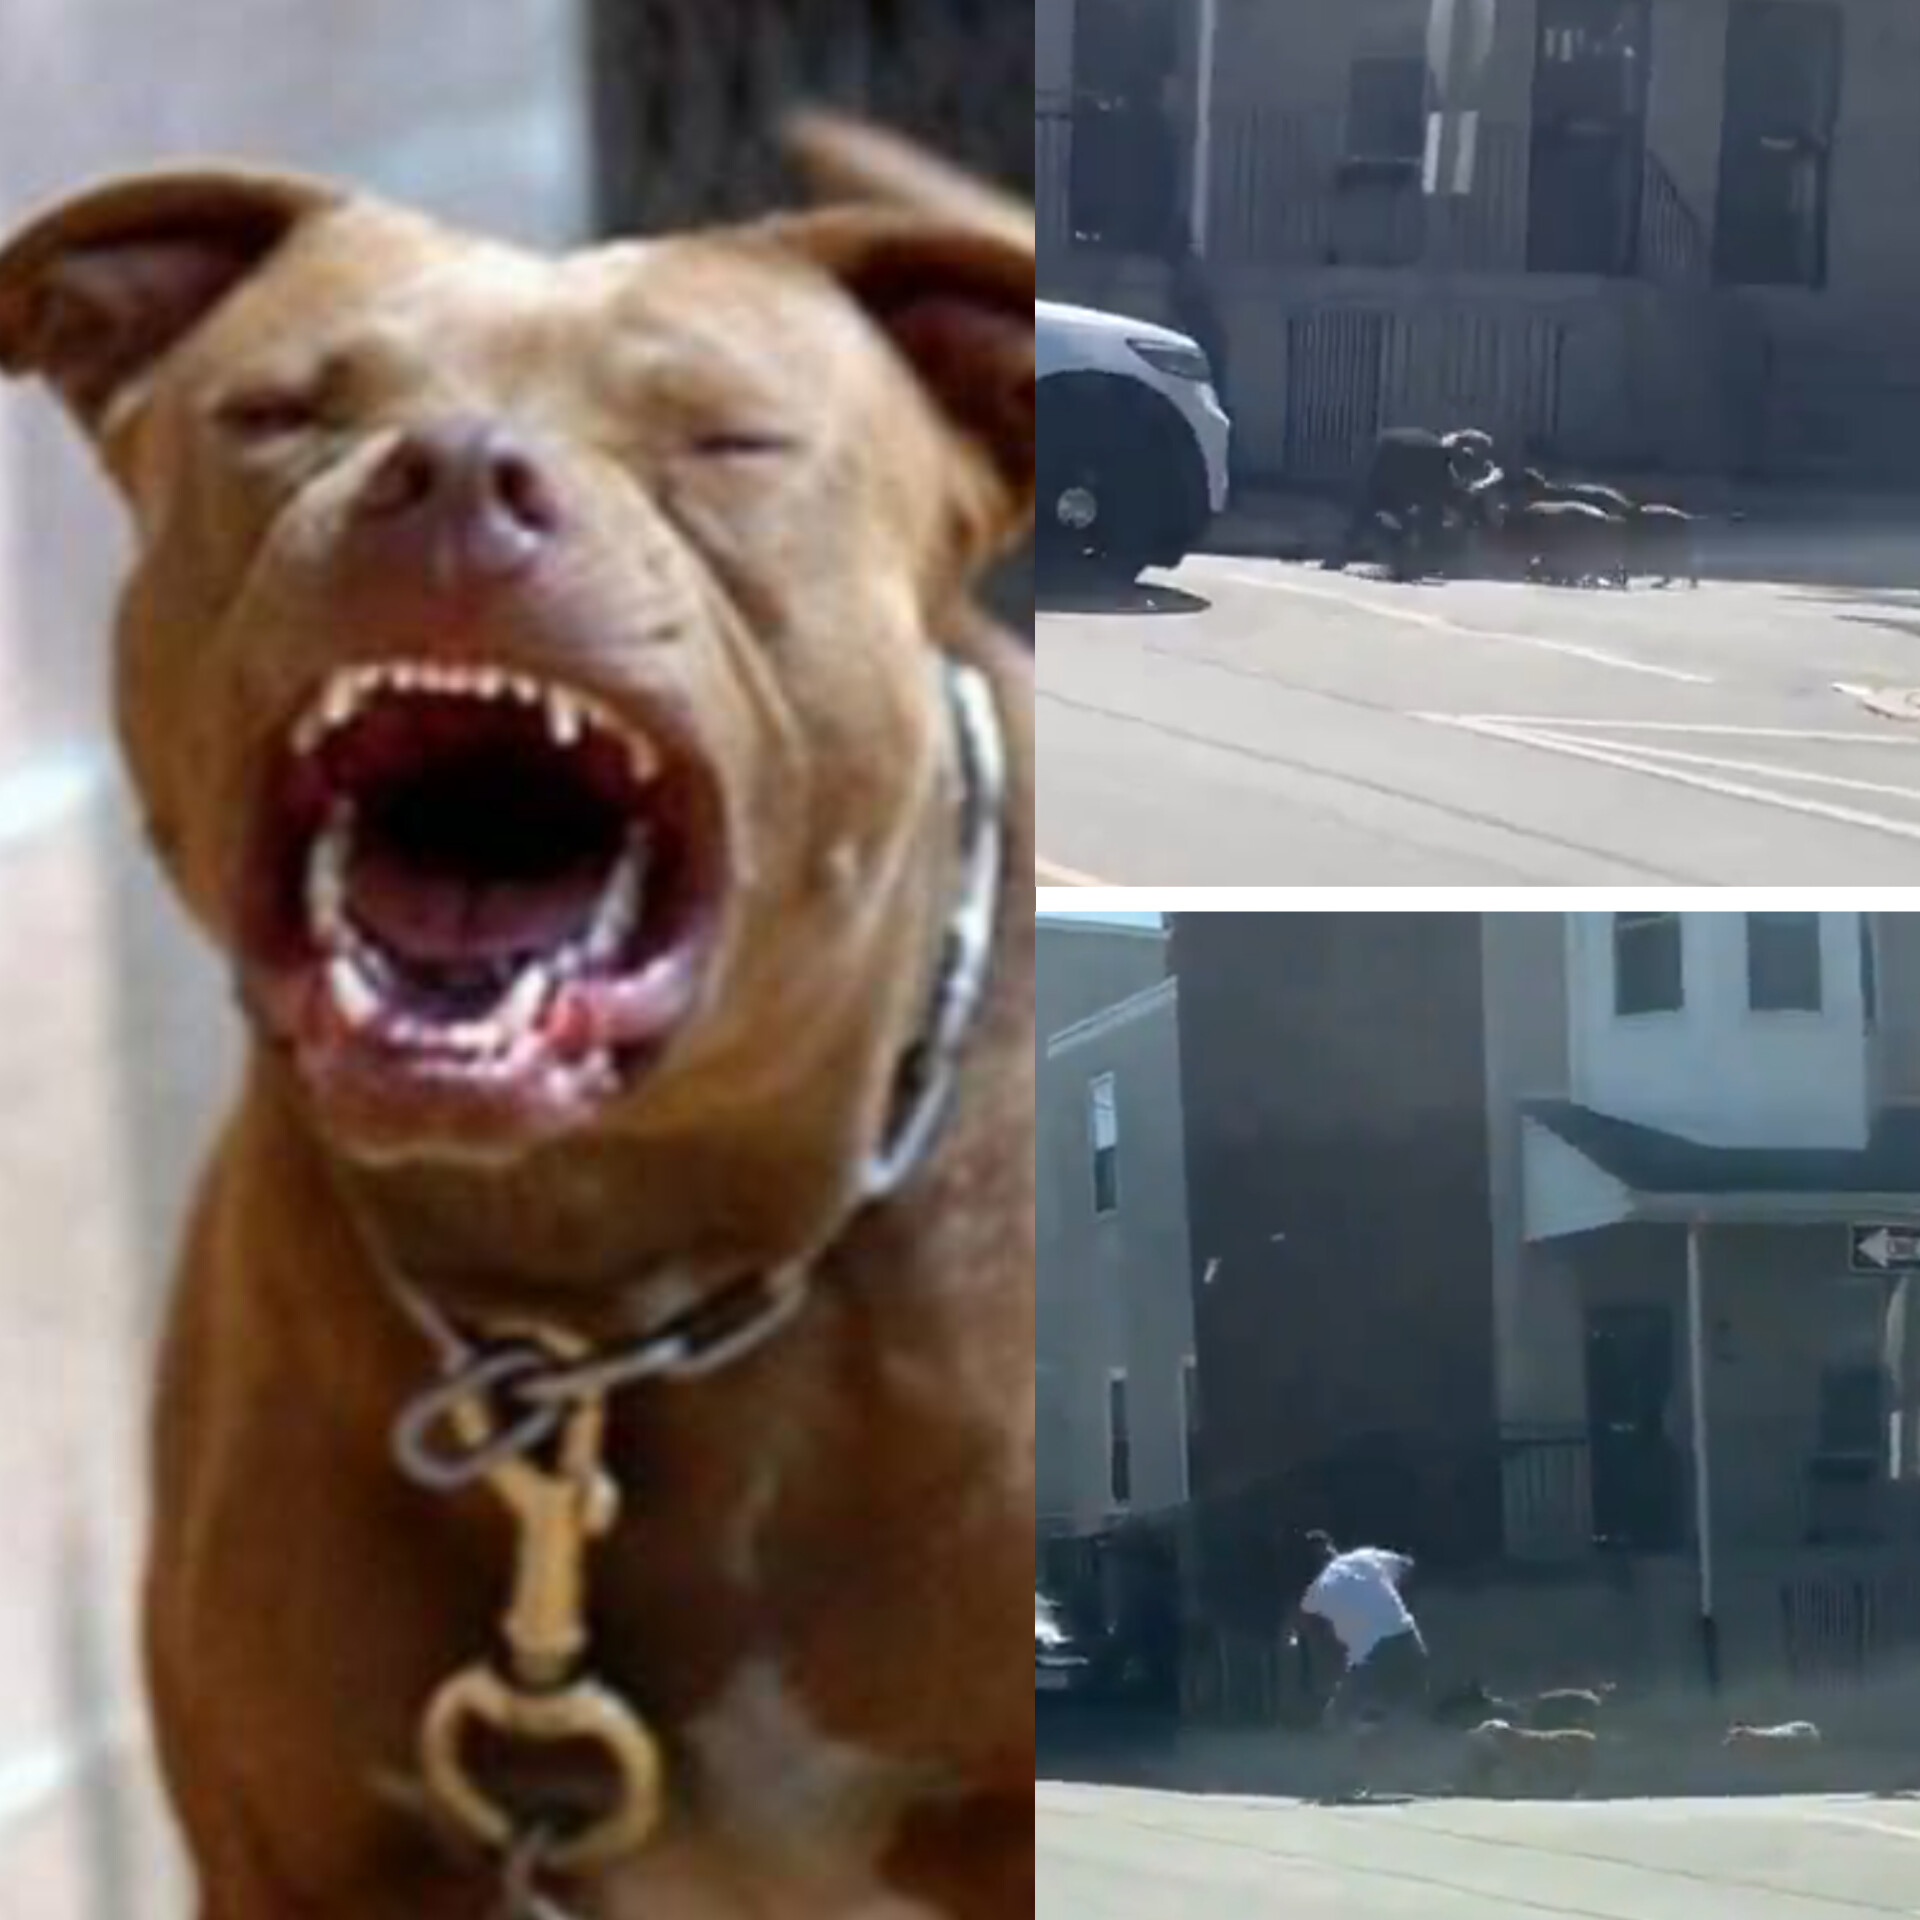 Four pitbull dogs maul man on street in broad daylight after he tried protecting his dog from being attacked (video)